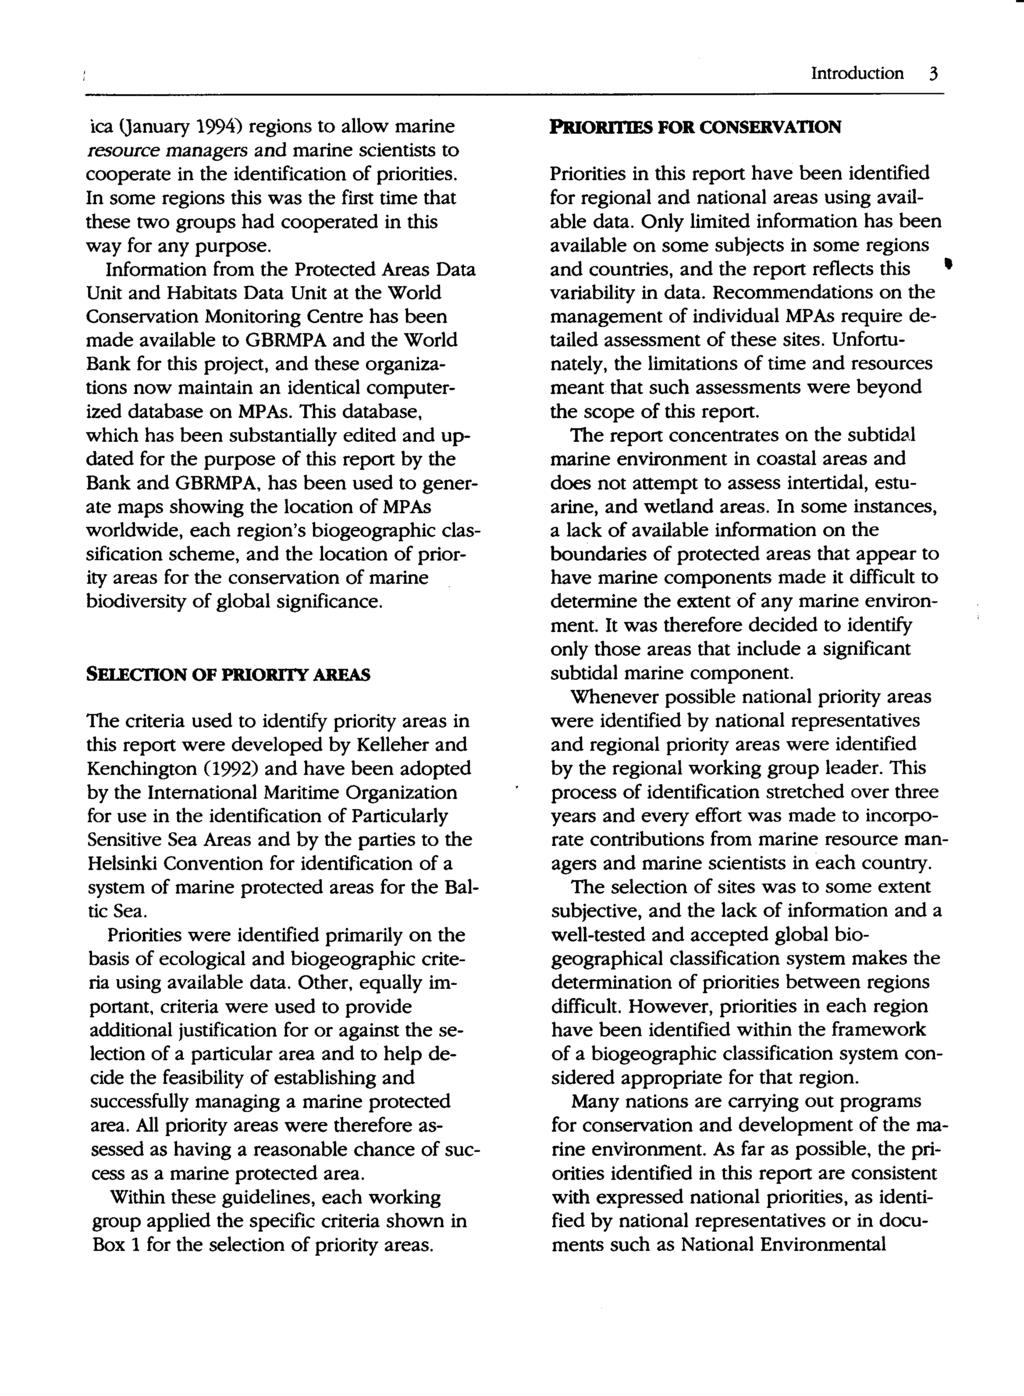 Introduction 3 ica (January 1994) regions to allow marine resource managers and marine scientists to cooperate in the identification of priorities.